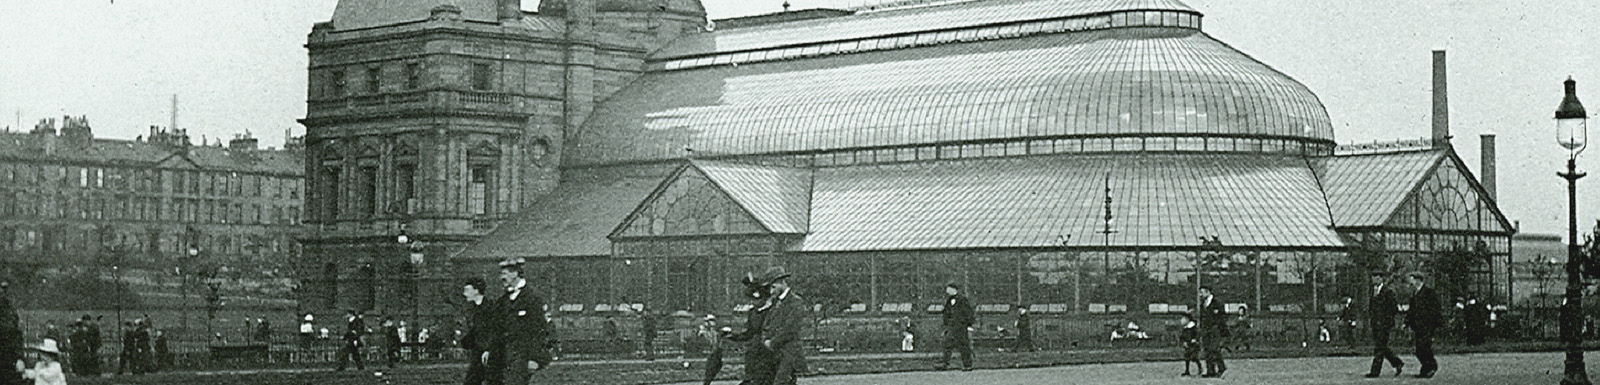 The People's Palace and Winter Gardens in 1910, image courtesy of Glasgow City Council